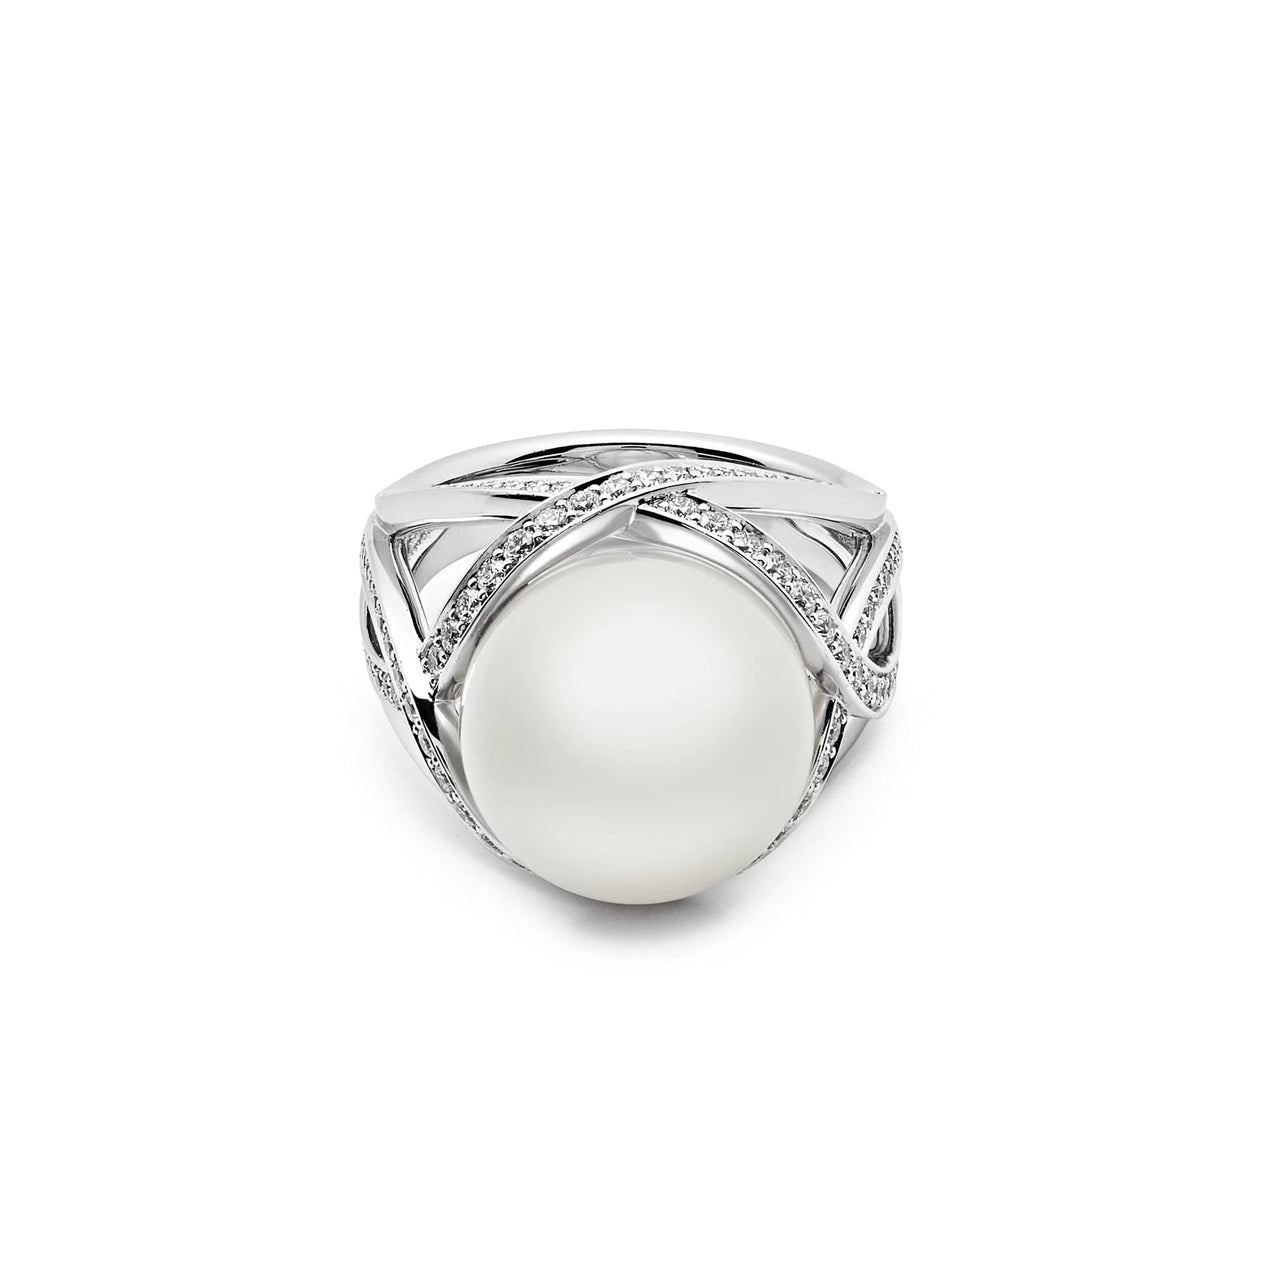 Mikimoto 'M Collection' White South Sea Cultured Pearl Ring